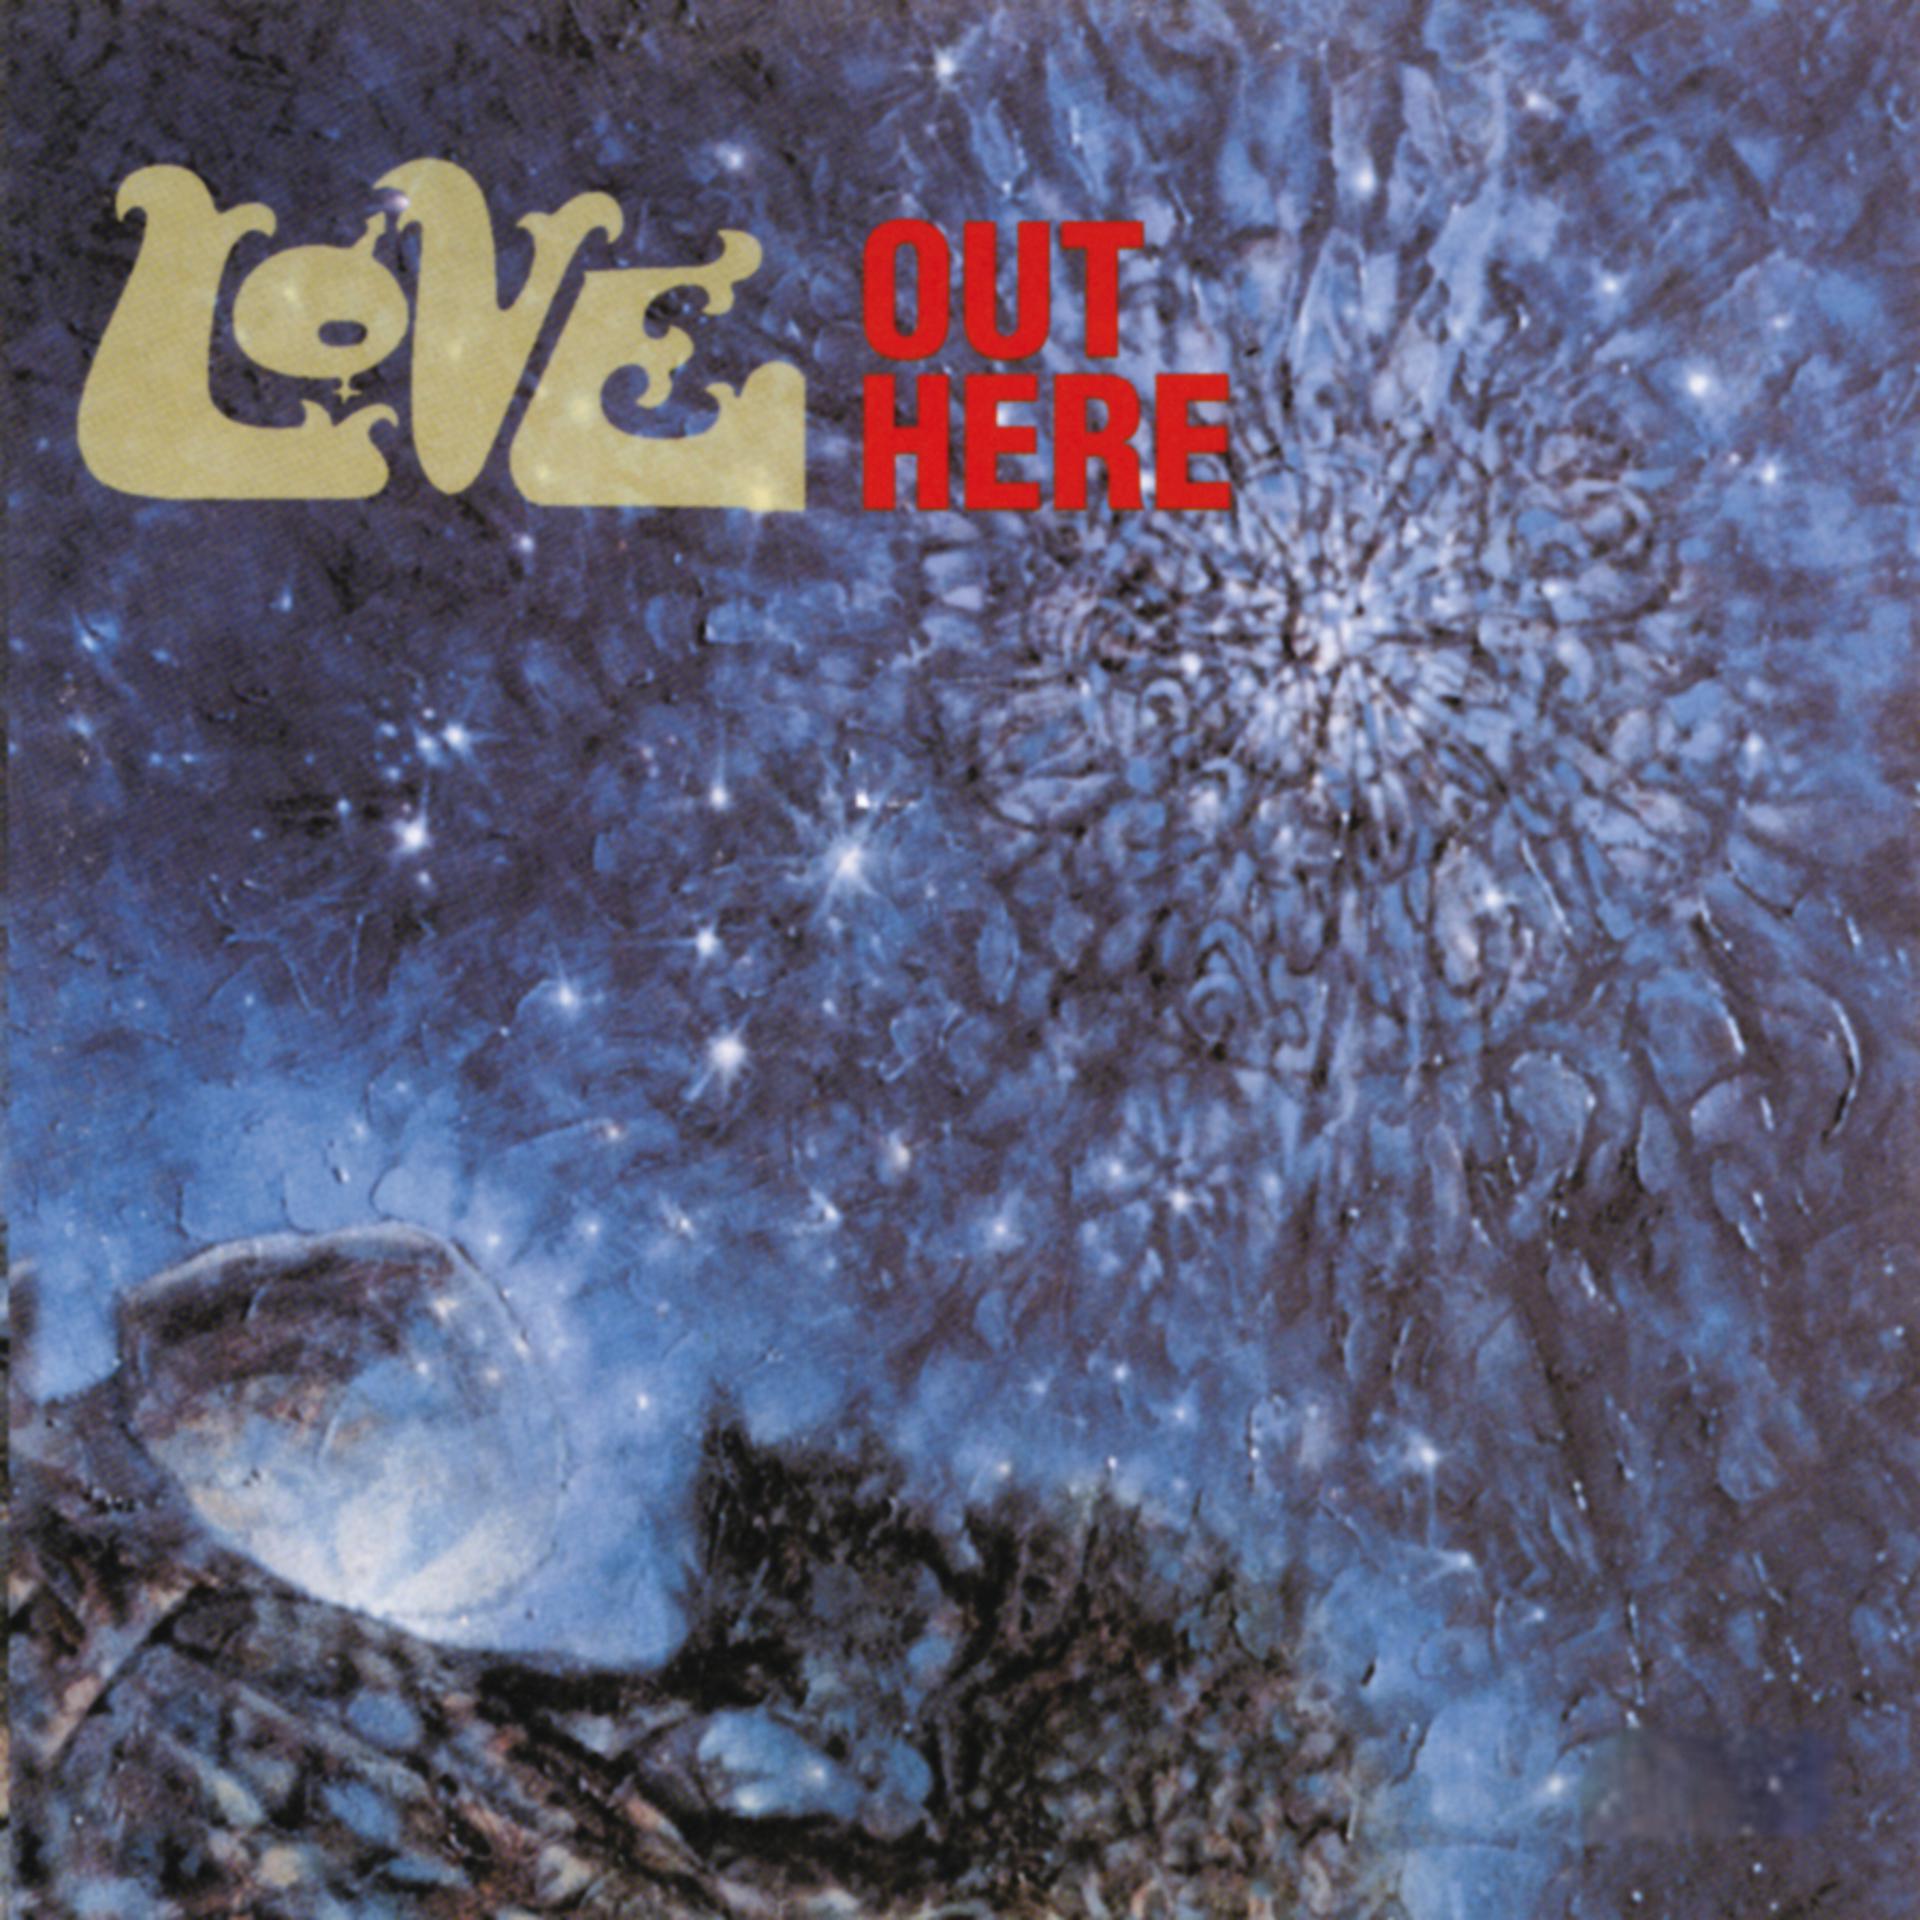 Here this out you. Love "out here". Love - out here ' 1969 CD Covers. Love "out here (2lp)". Love "out there (CD)".